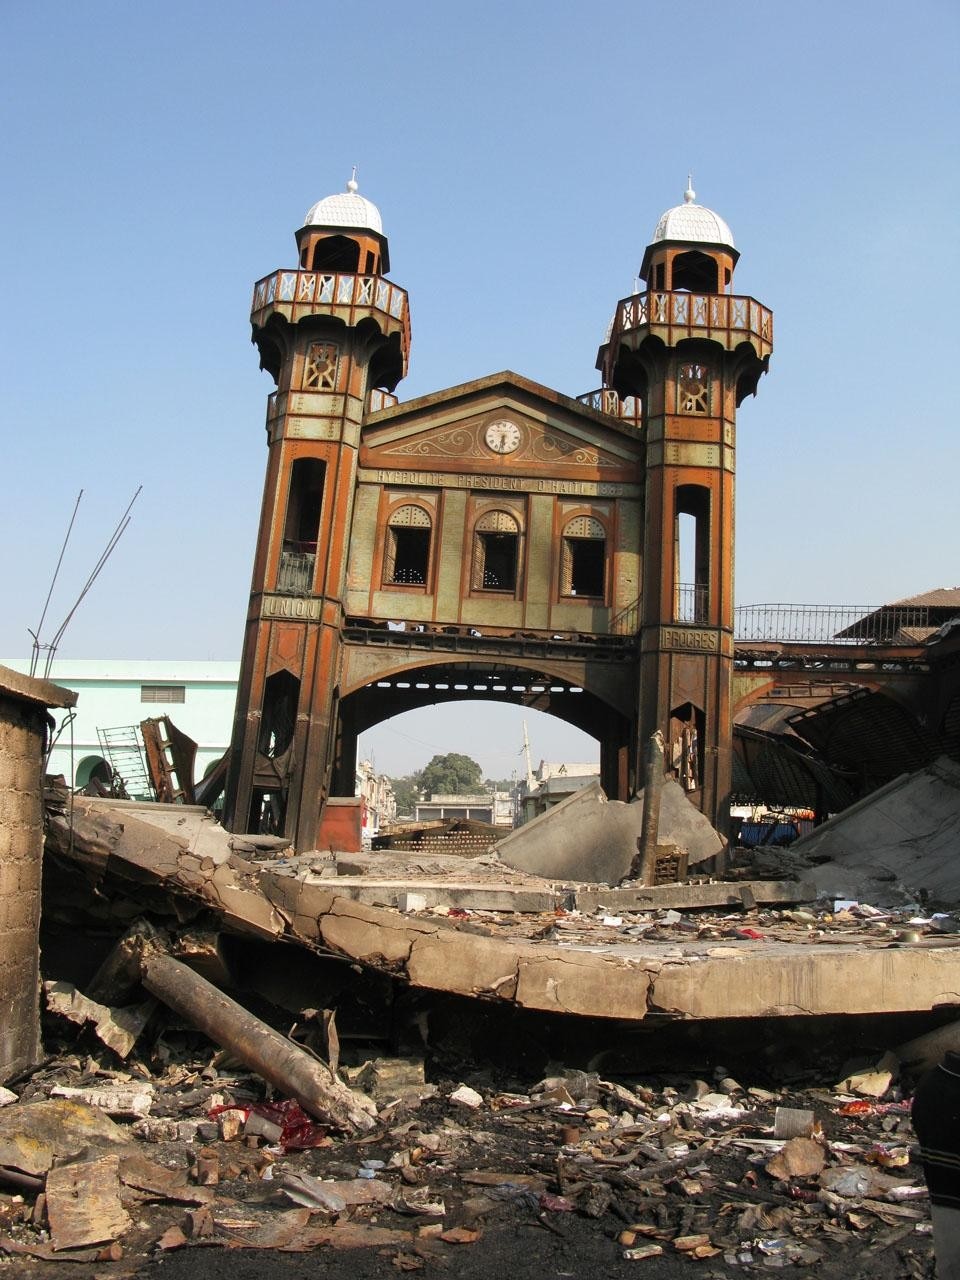 Shortly after the earthquake on 12 Jan 2010, amid the rubble, the two red and green wrought iron towers, slightly skewed, burnt and broken, are still upright and connected to two covered halls.